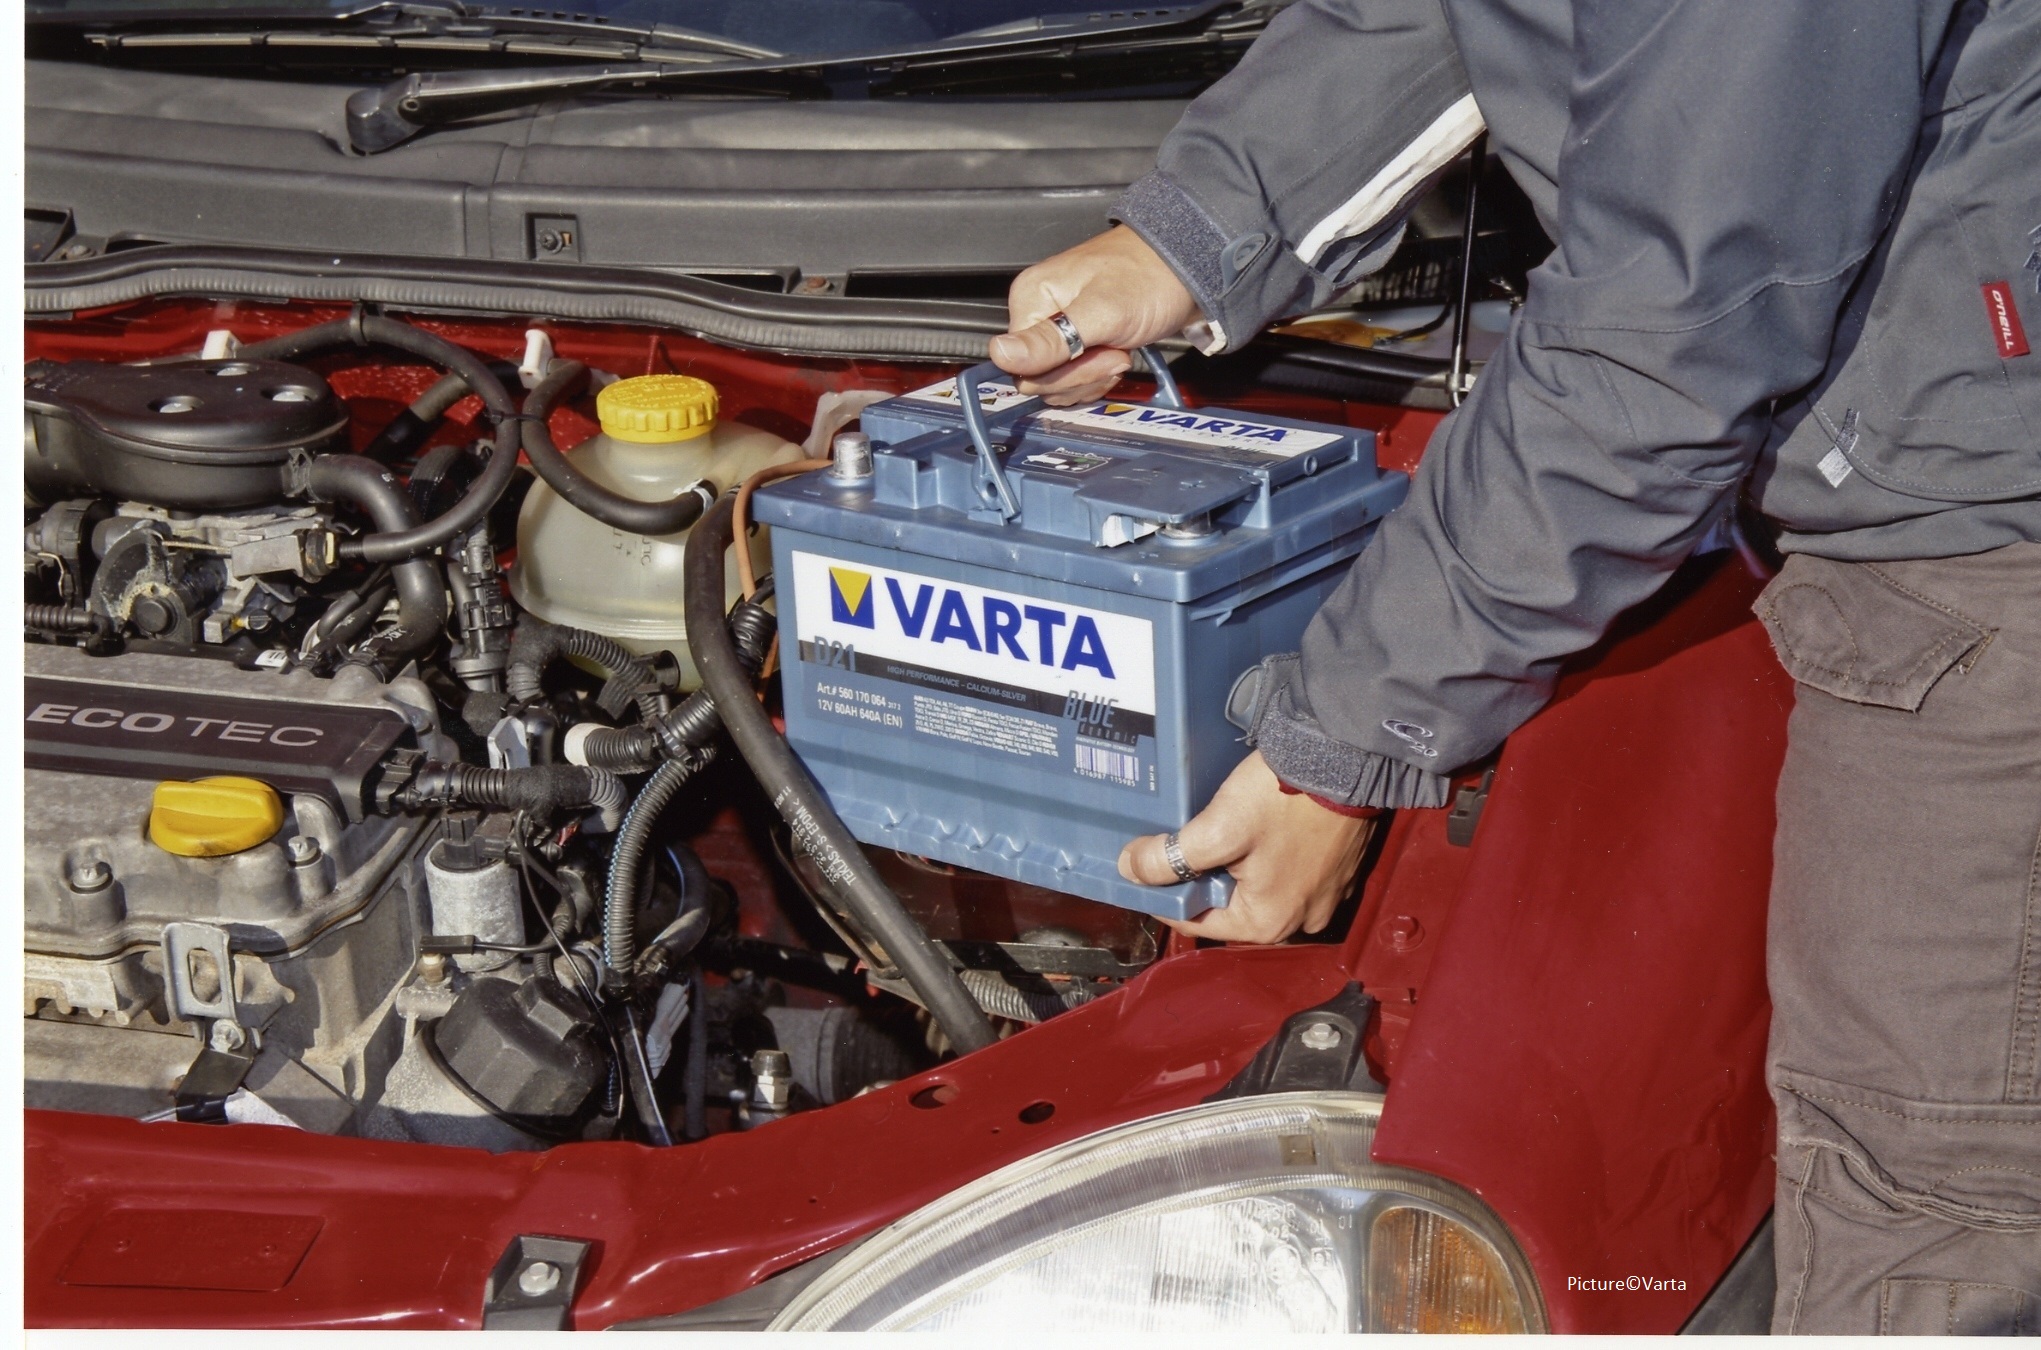 As the weather’s getting colder, how do you know if car batteries are giving up the ghost?